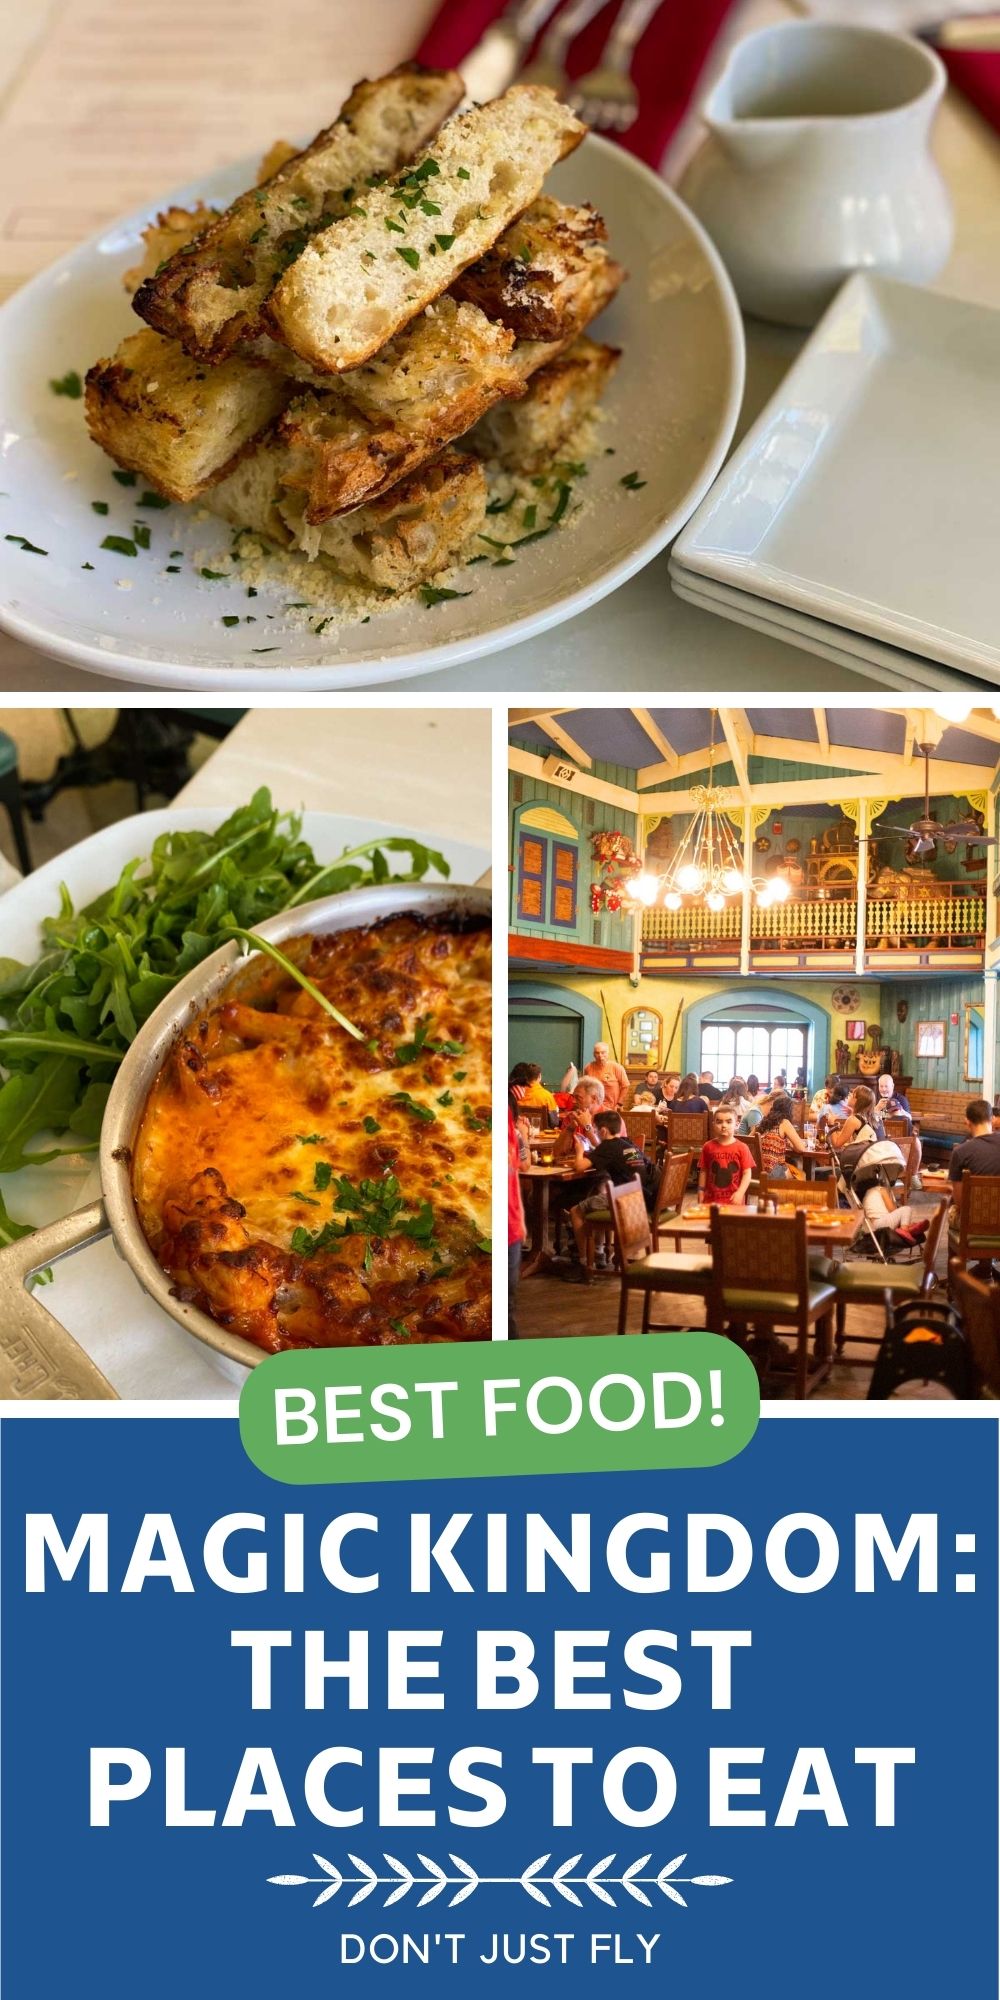 A photo collage shows several dishes from a Disney restaurant and the inside of the Skipper Canteen.